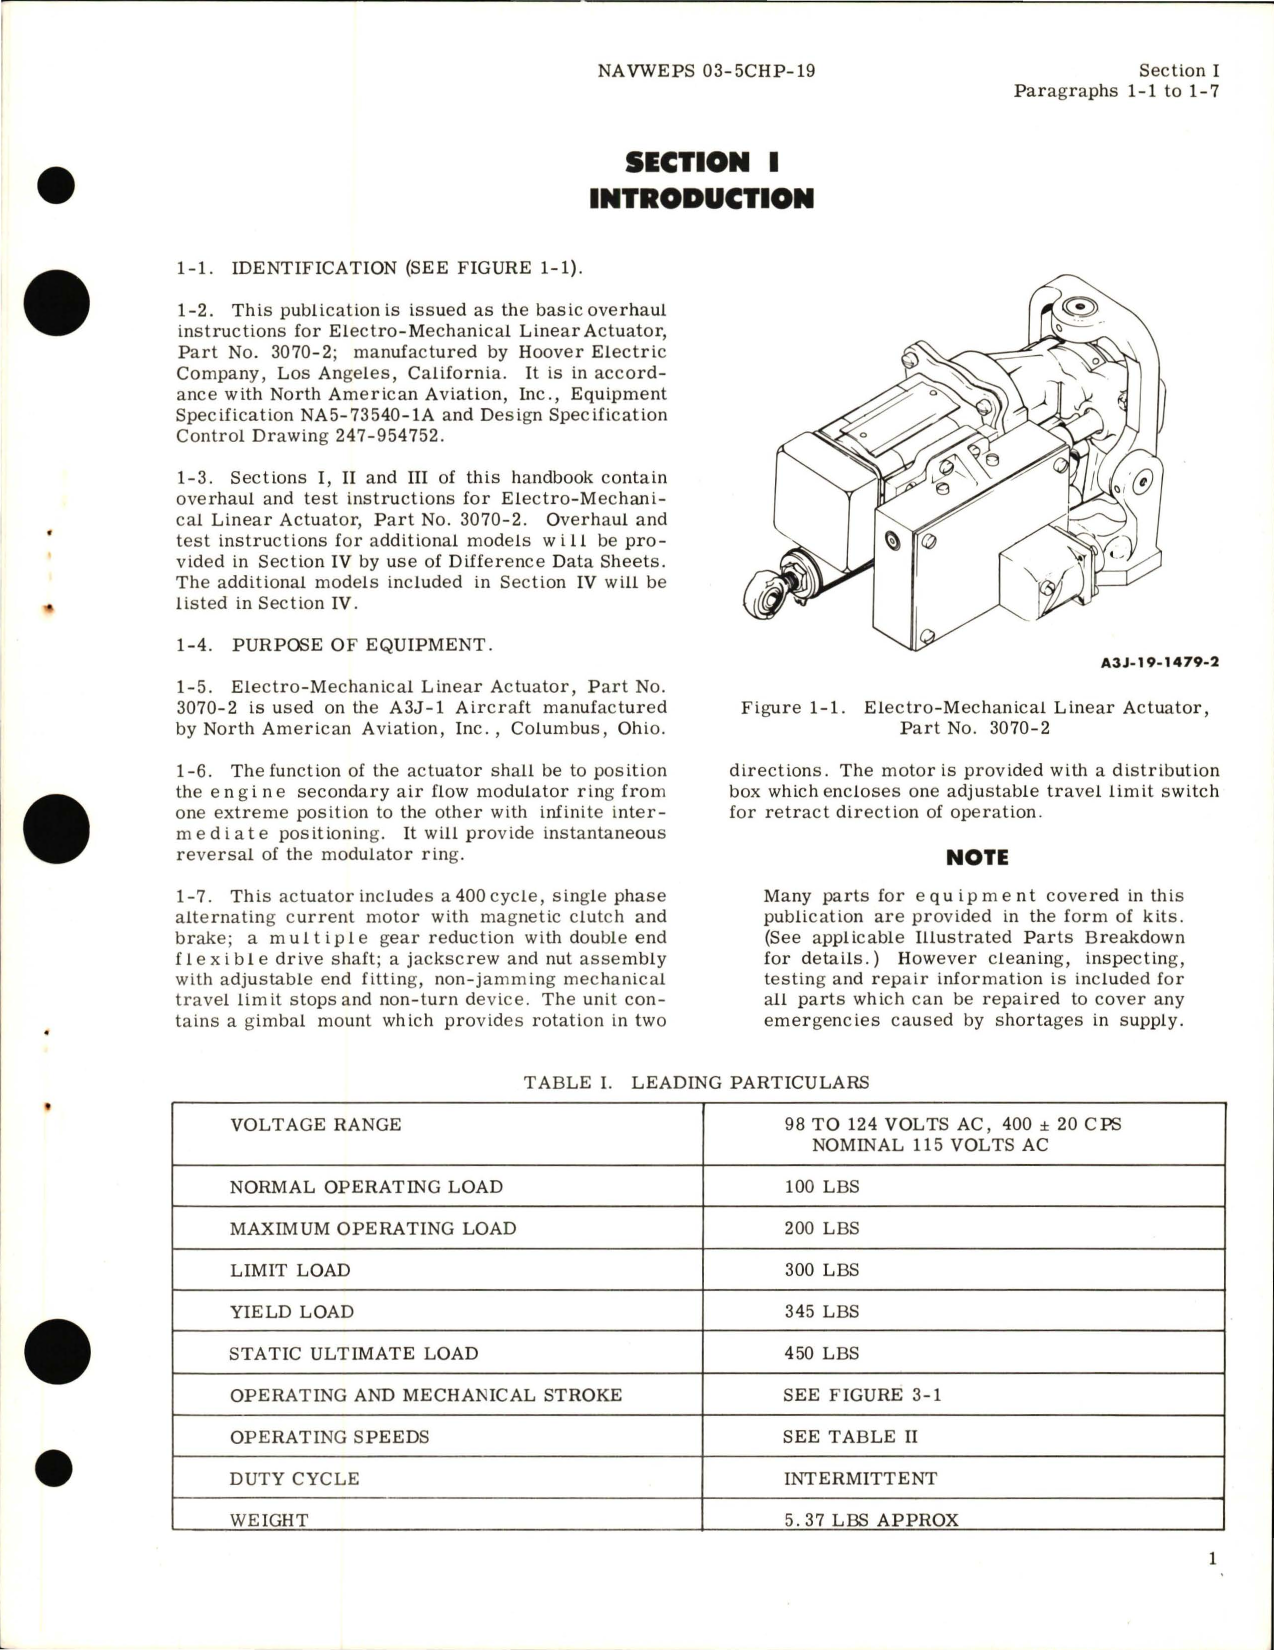 Sample page 5 from AirCorps Library document: Overhaul Instructions for Electro-Mechanical Linear Actuator 3070-2 and 36070-22